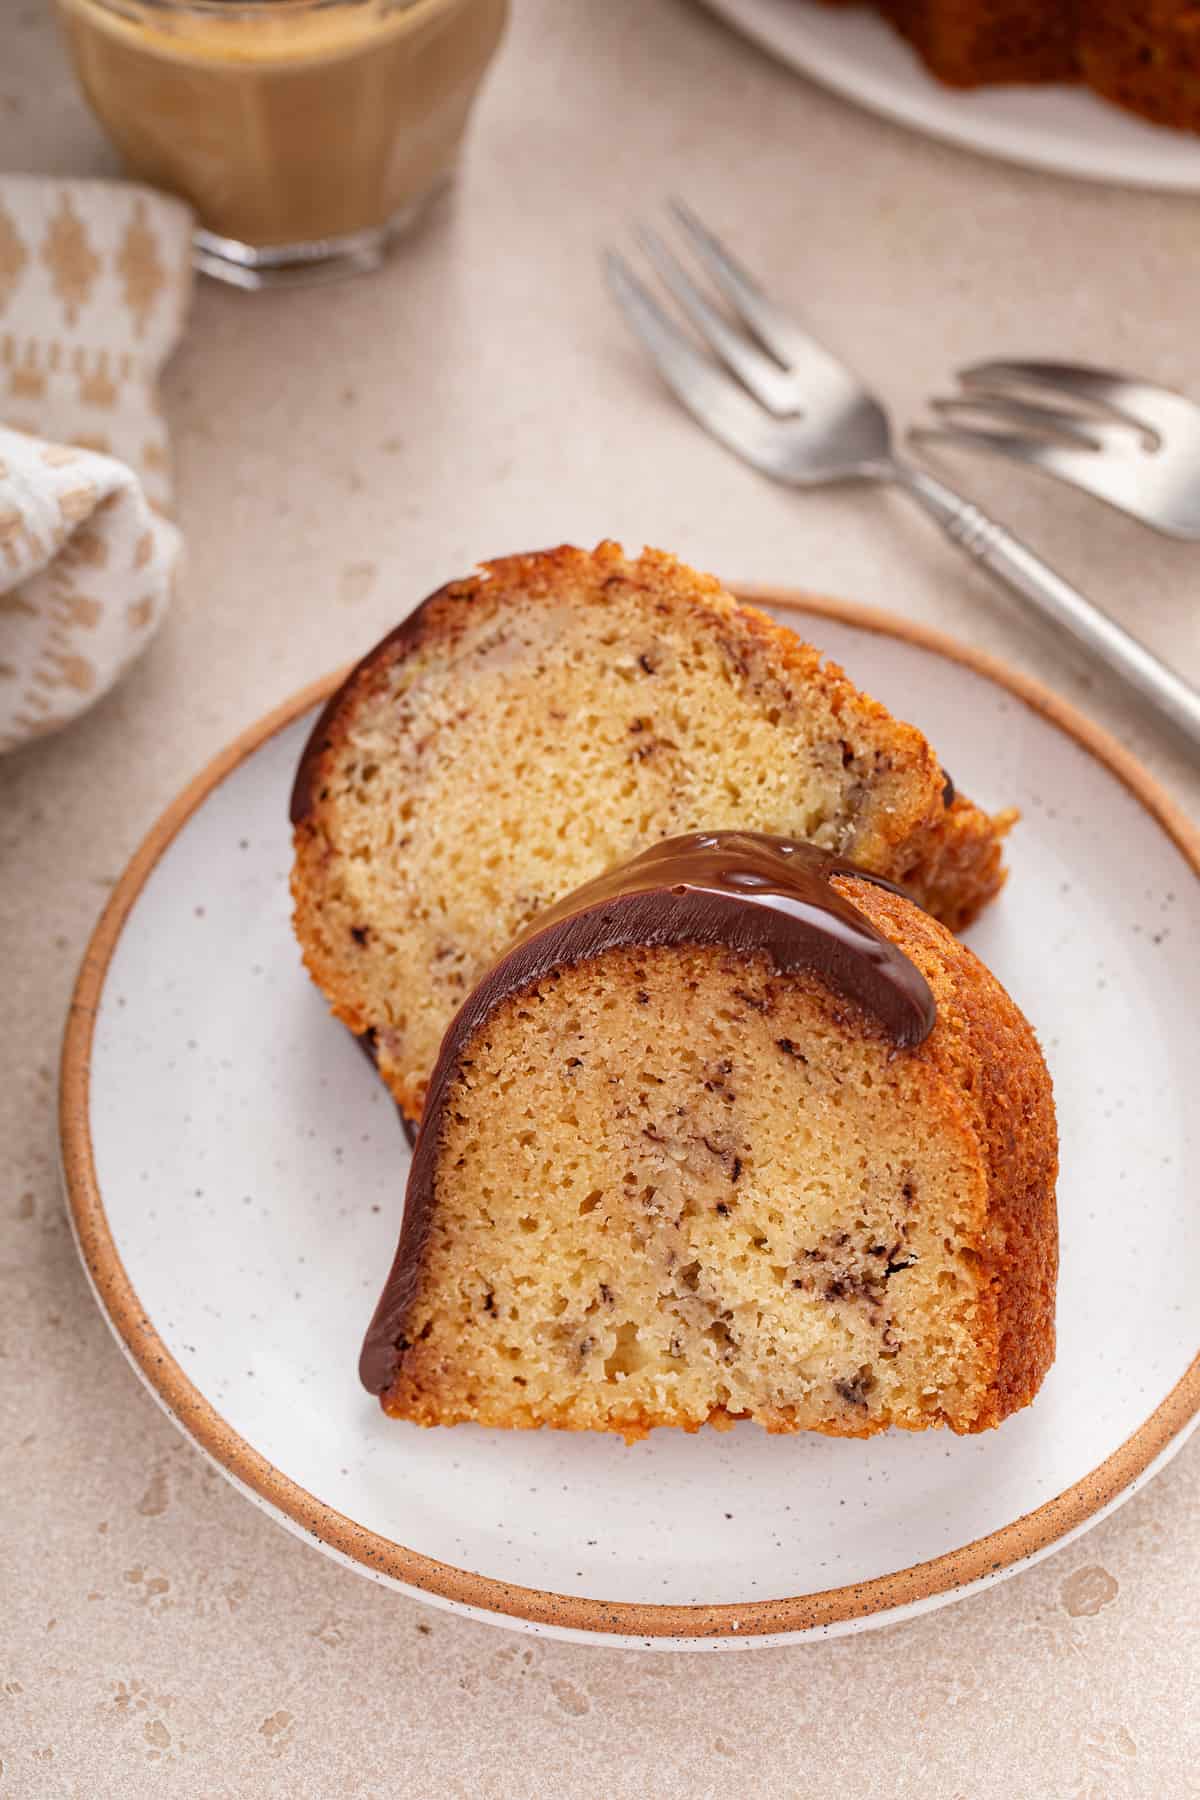 Two slices of banana bundt cake leaning against each other on a plate.